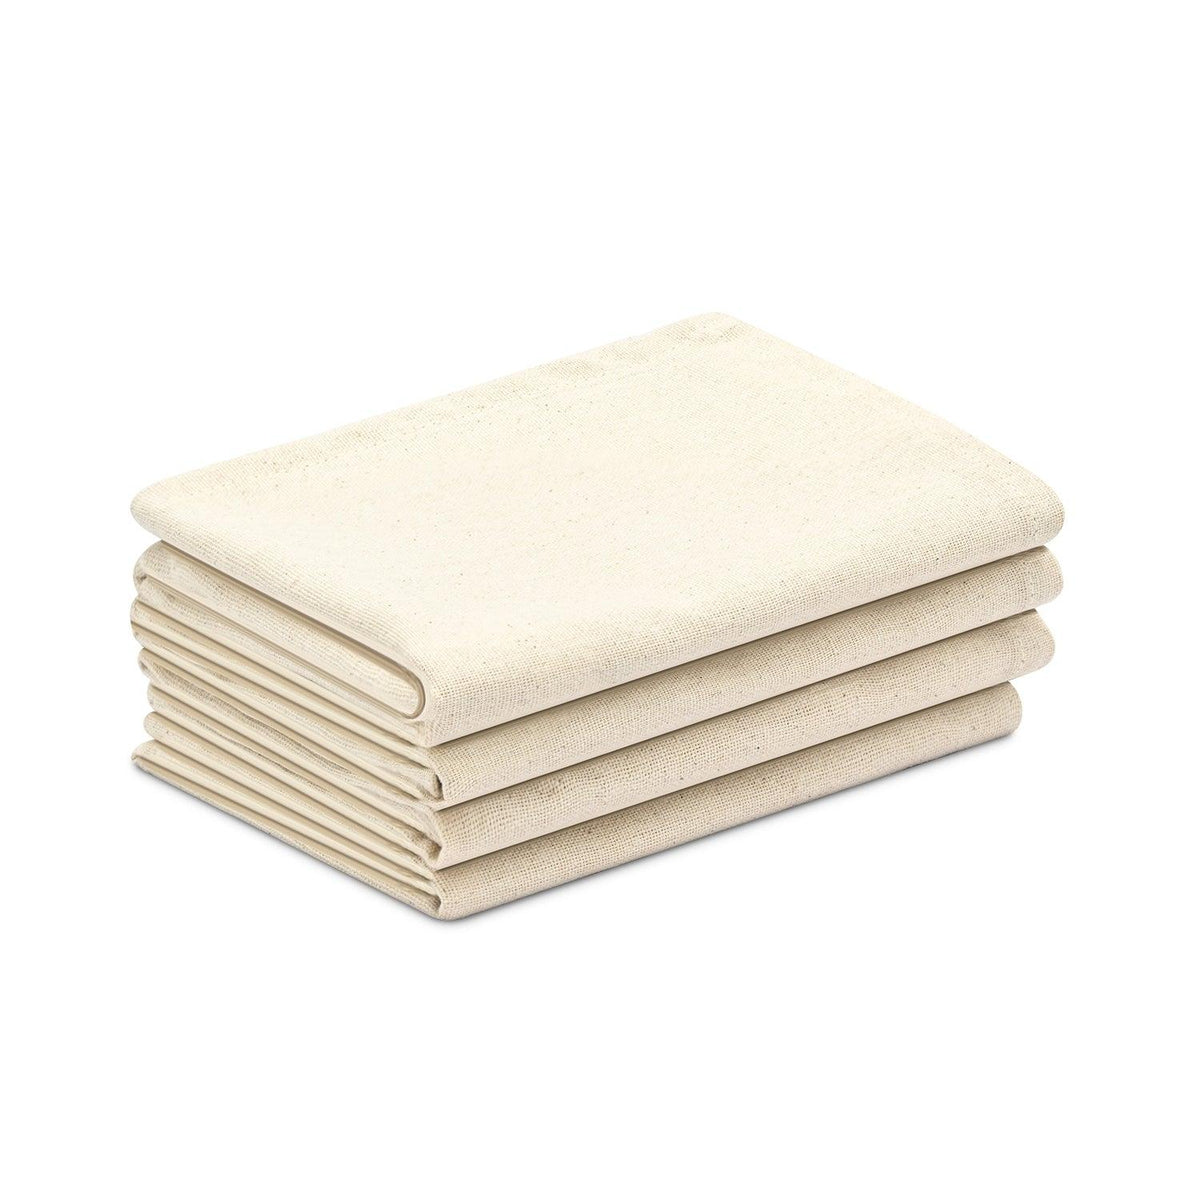 Multipurpose Kitchen towels are folded and pressed accurately